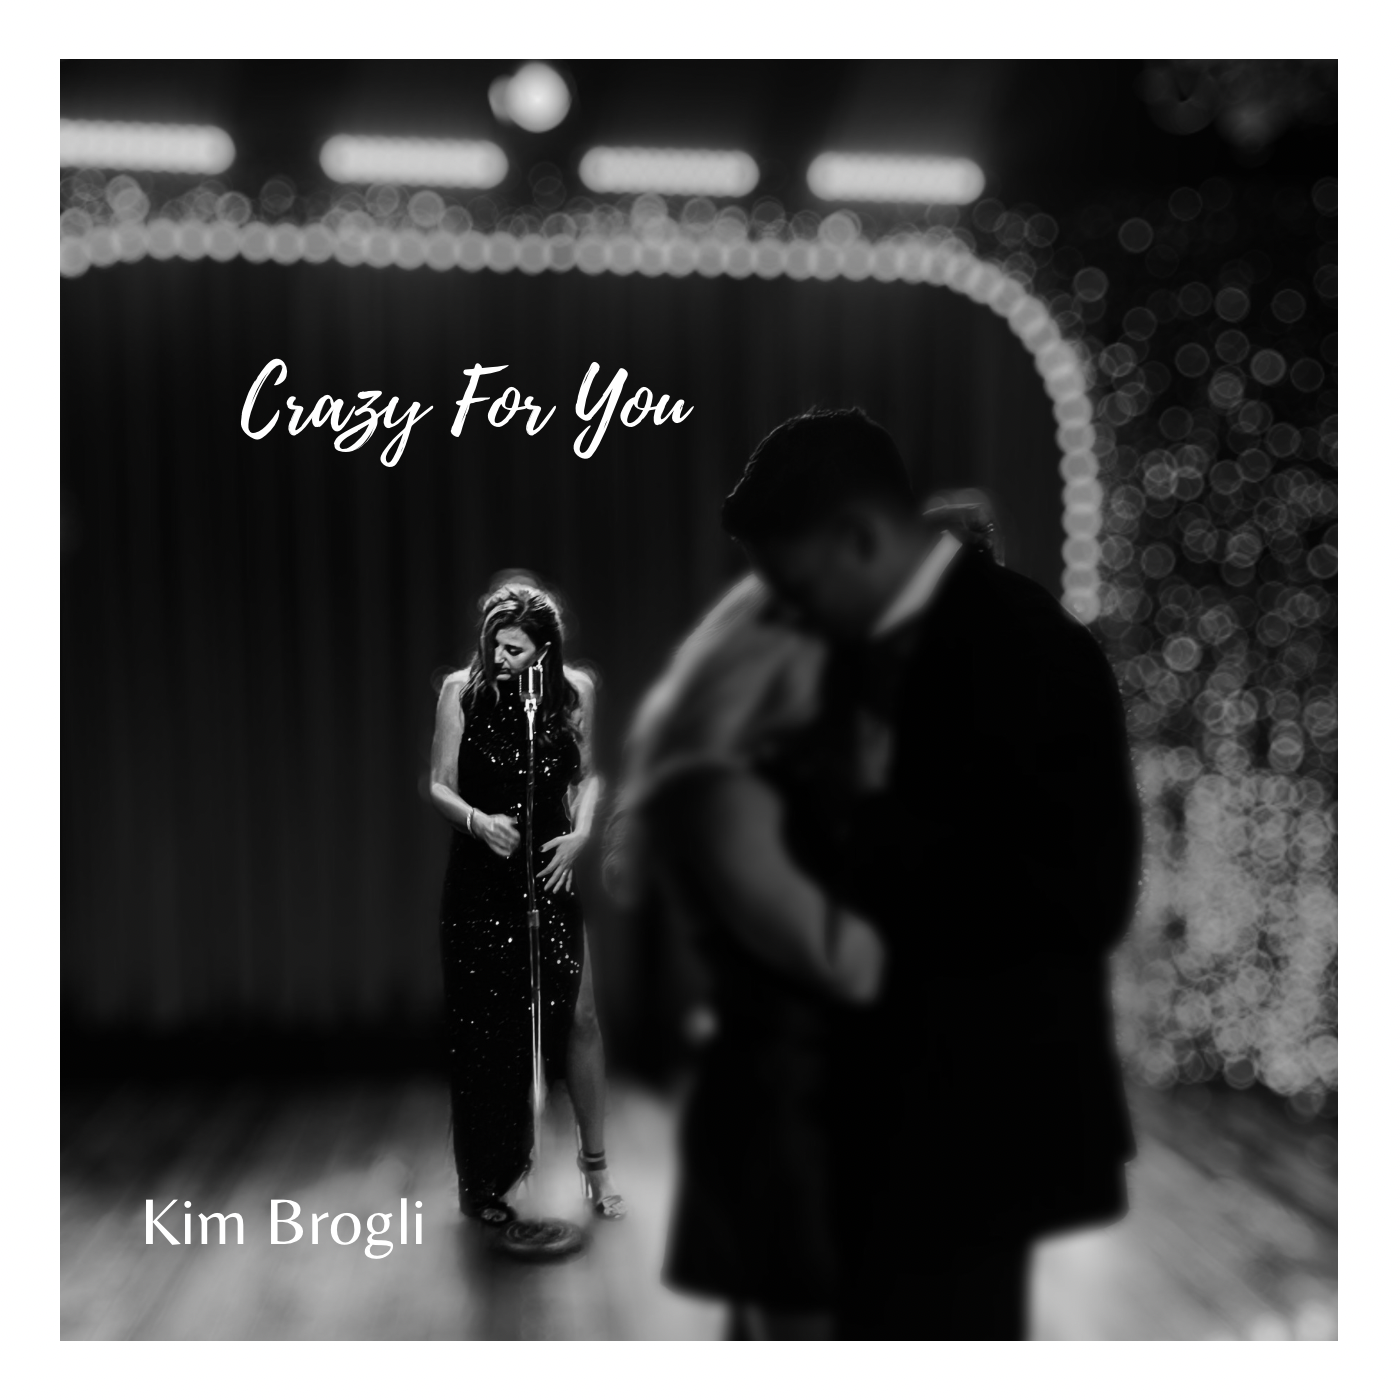 Cover art for "Crazy For You" cover song by Kim Brogli